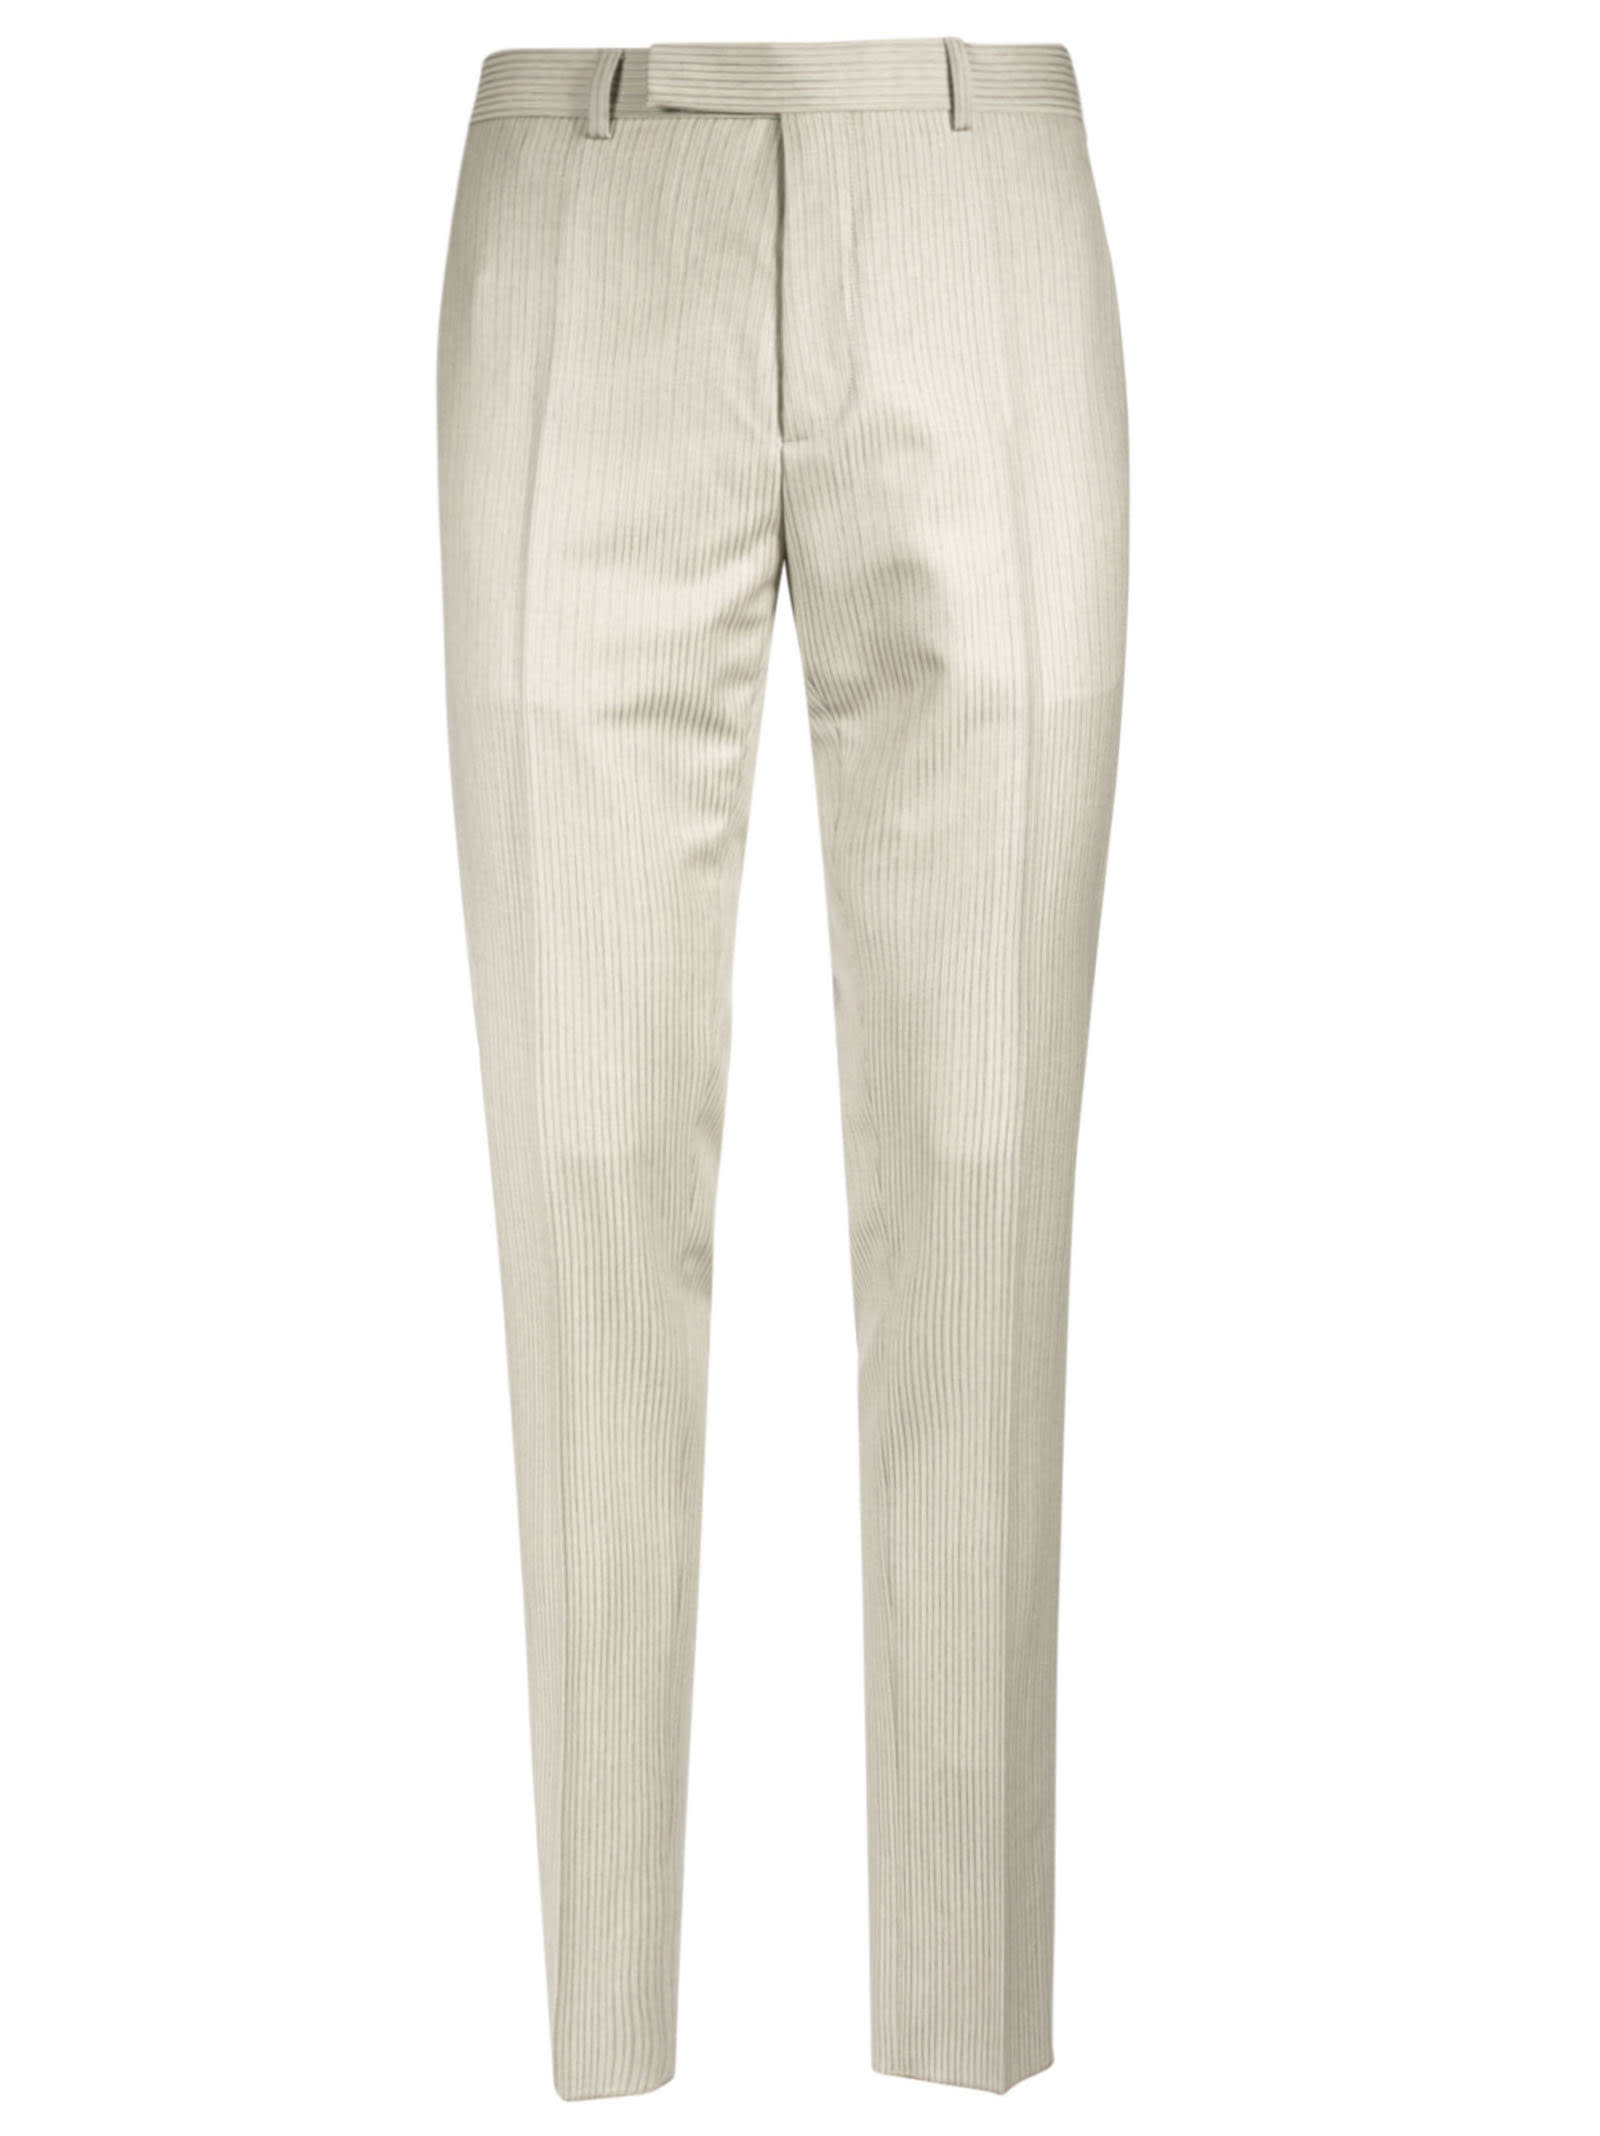 Christian Dior Long Length Fitted Trousers